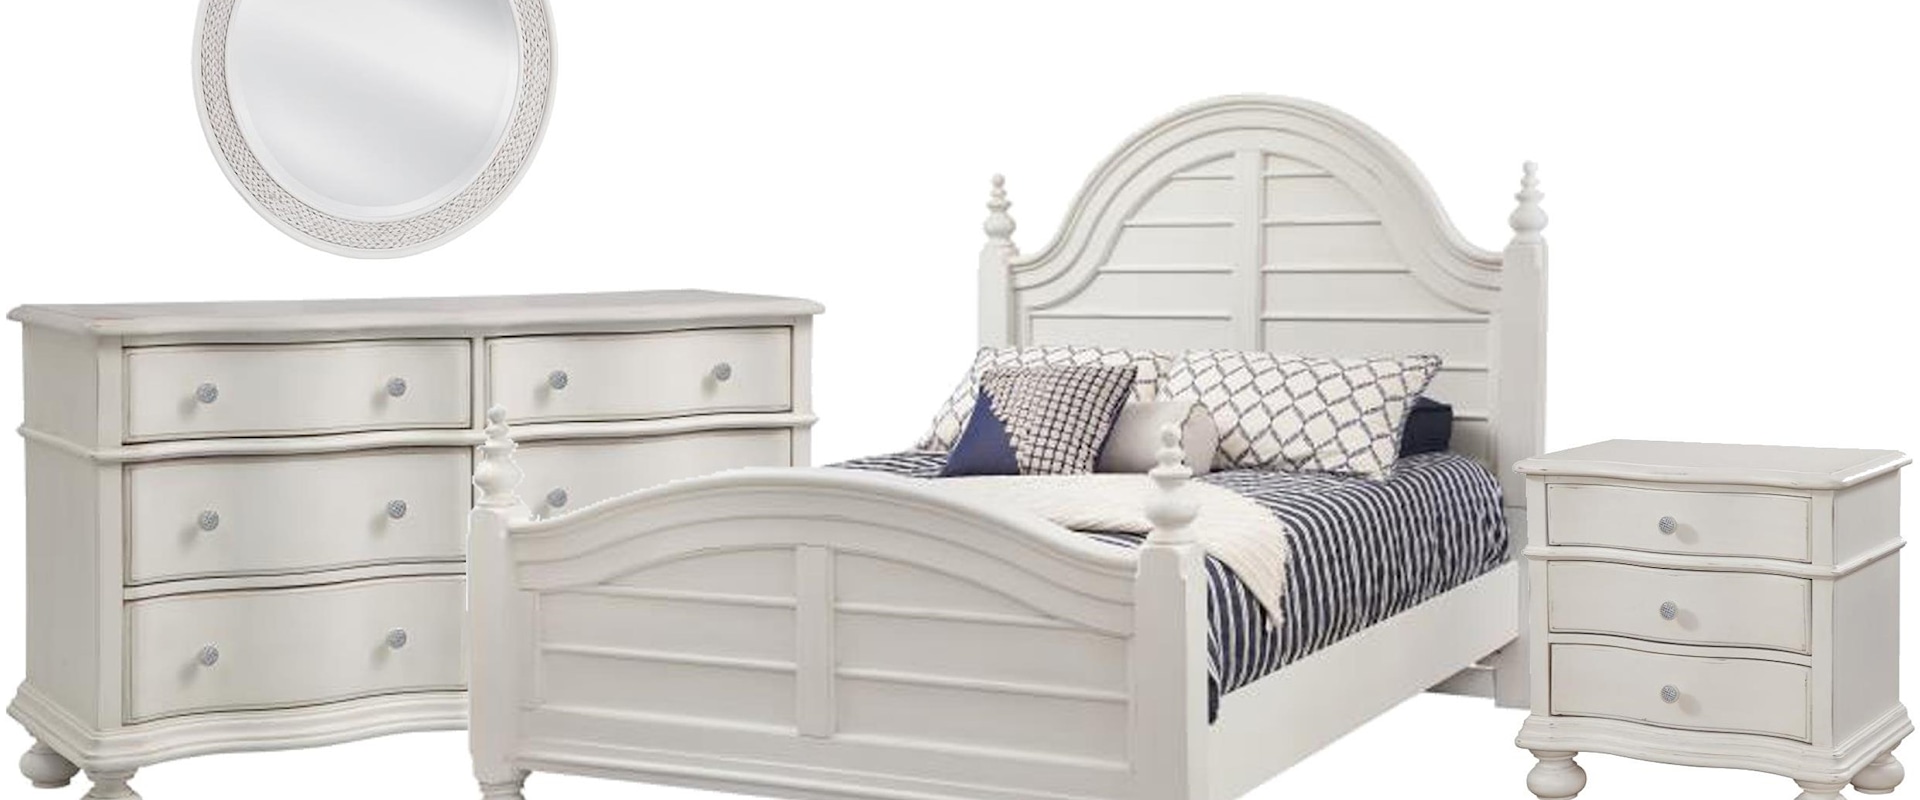 Queen Poster Bed, 6 Drawer Bureau, Round Mirror, and 3 Drawer Nightstand